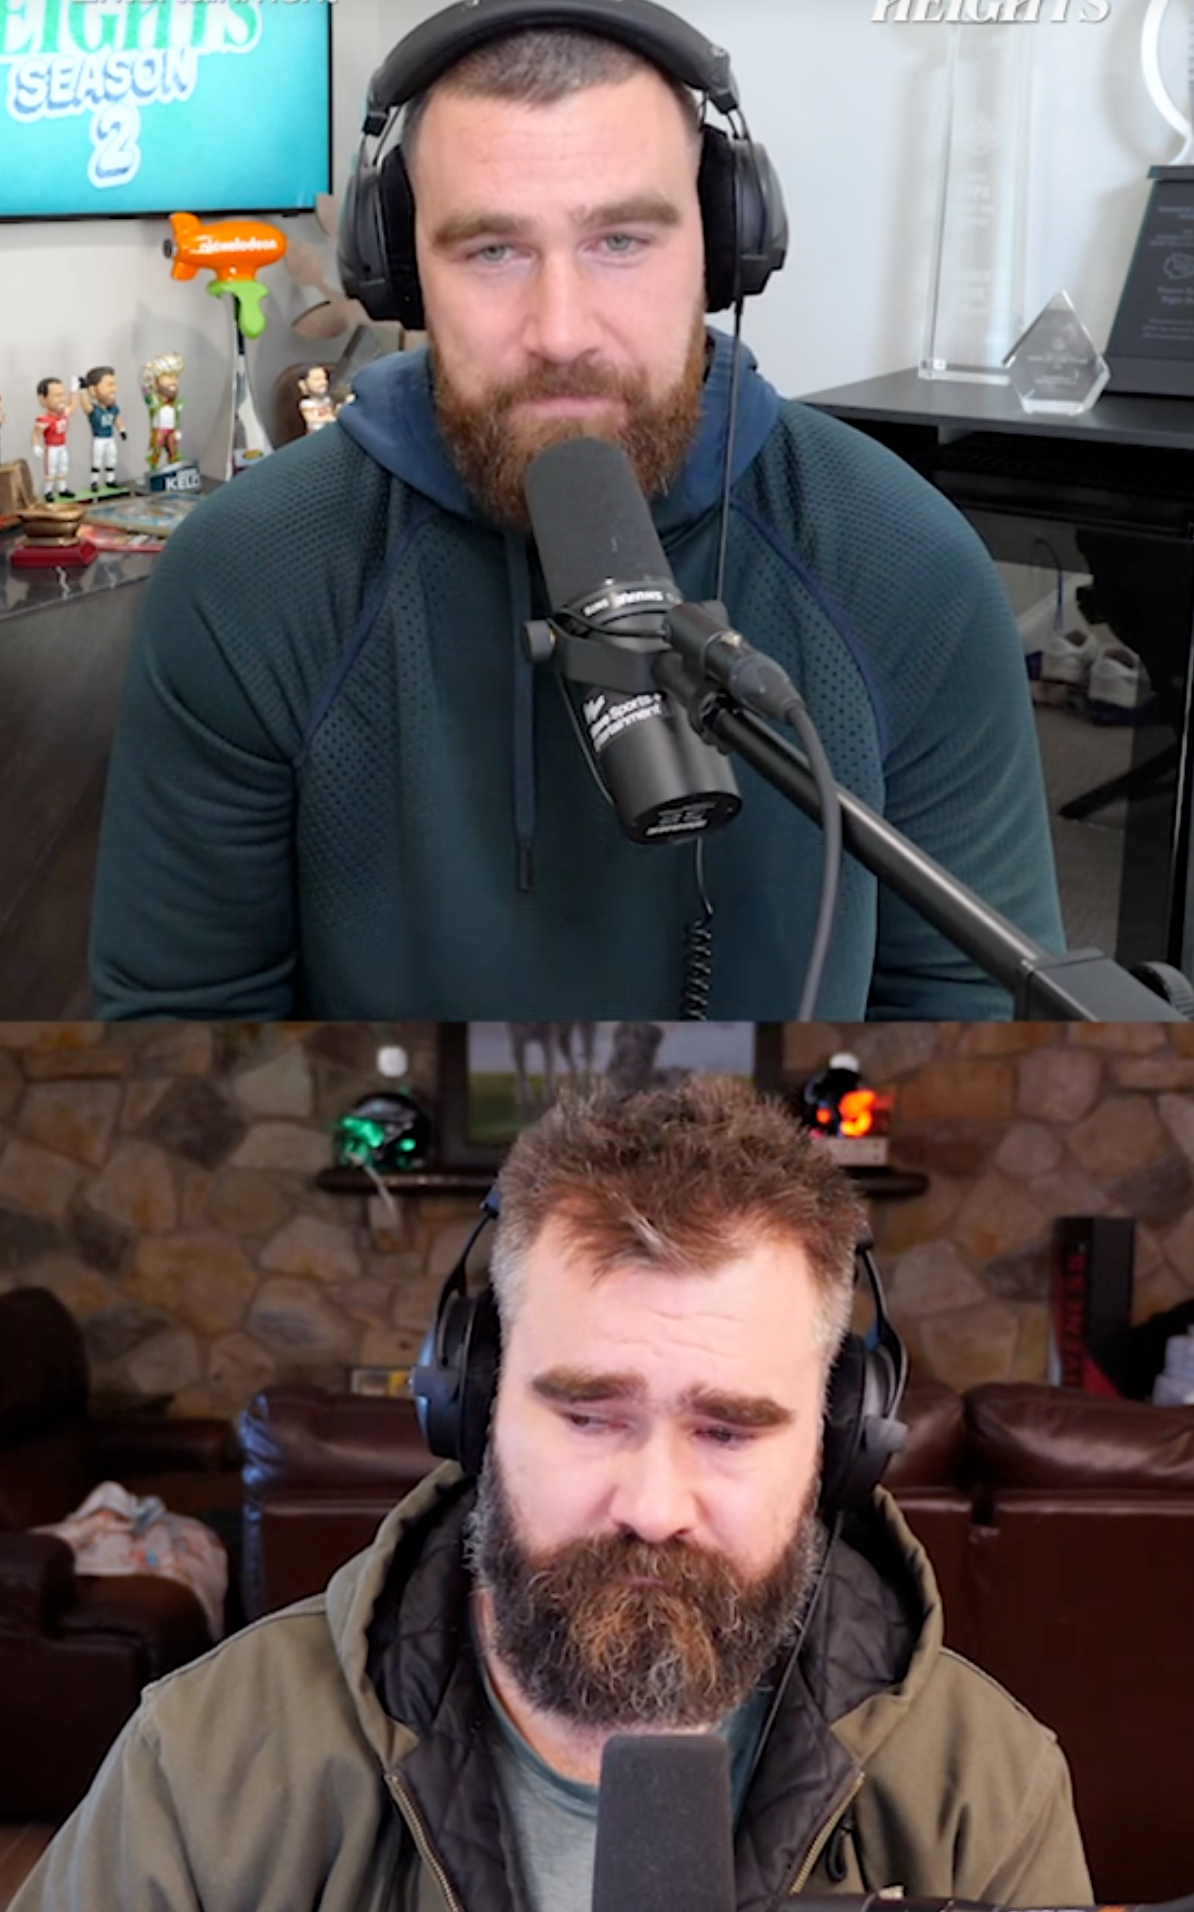 Screenshot of Travis and Jason Kelce from a recent podcast recording. Jason is looking emotional after talking about retirement possibilities.